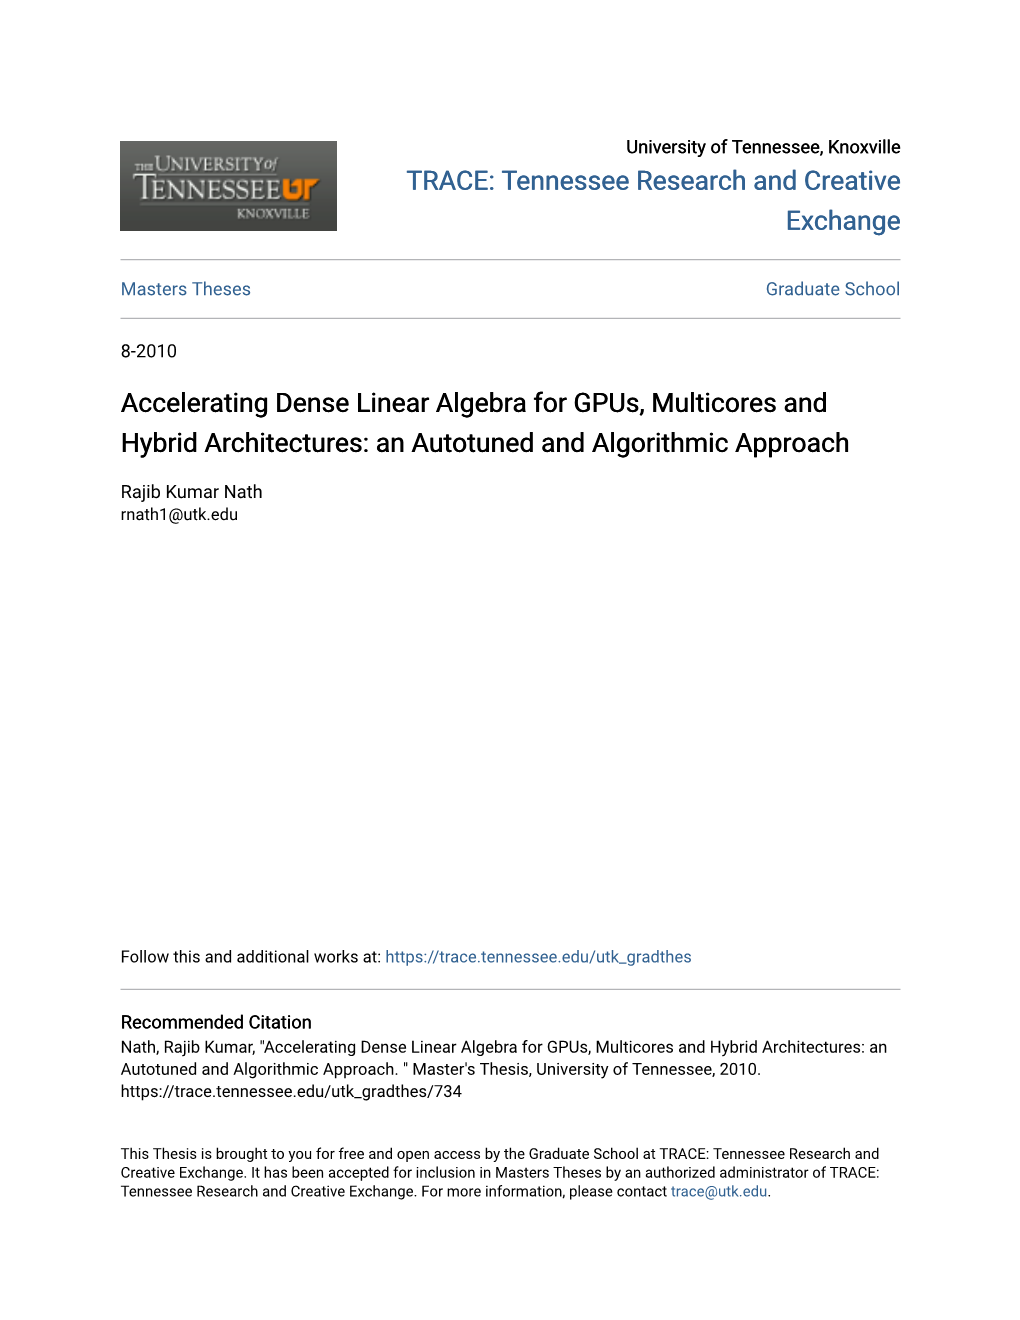 Accelerating Dense Linear Algebra for Gpus, Multicores and Hybrid Architectures: an Autotuned and Algorithmic Approach